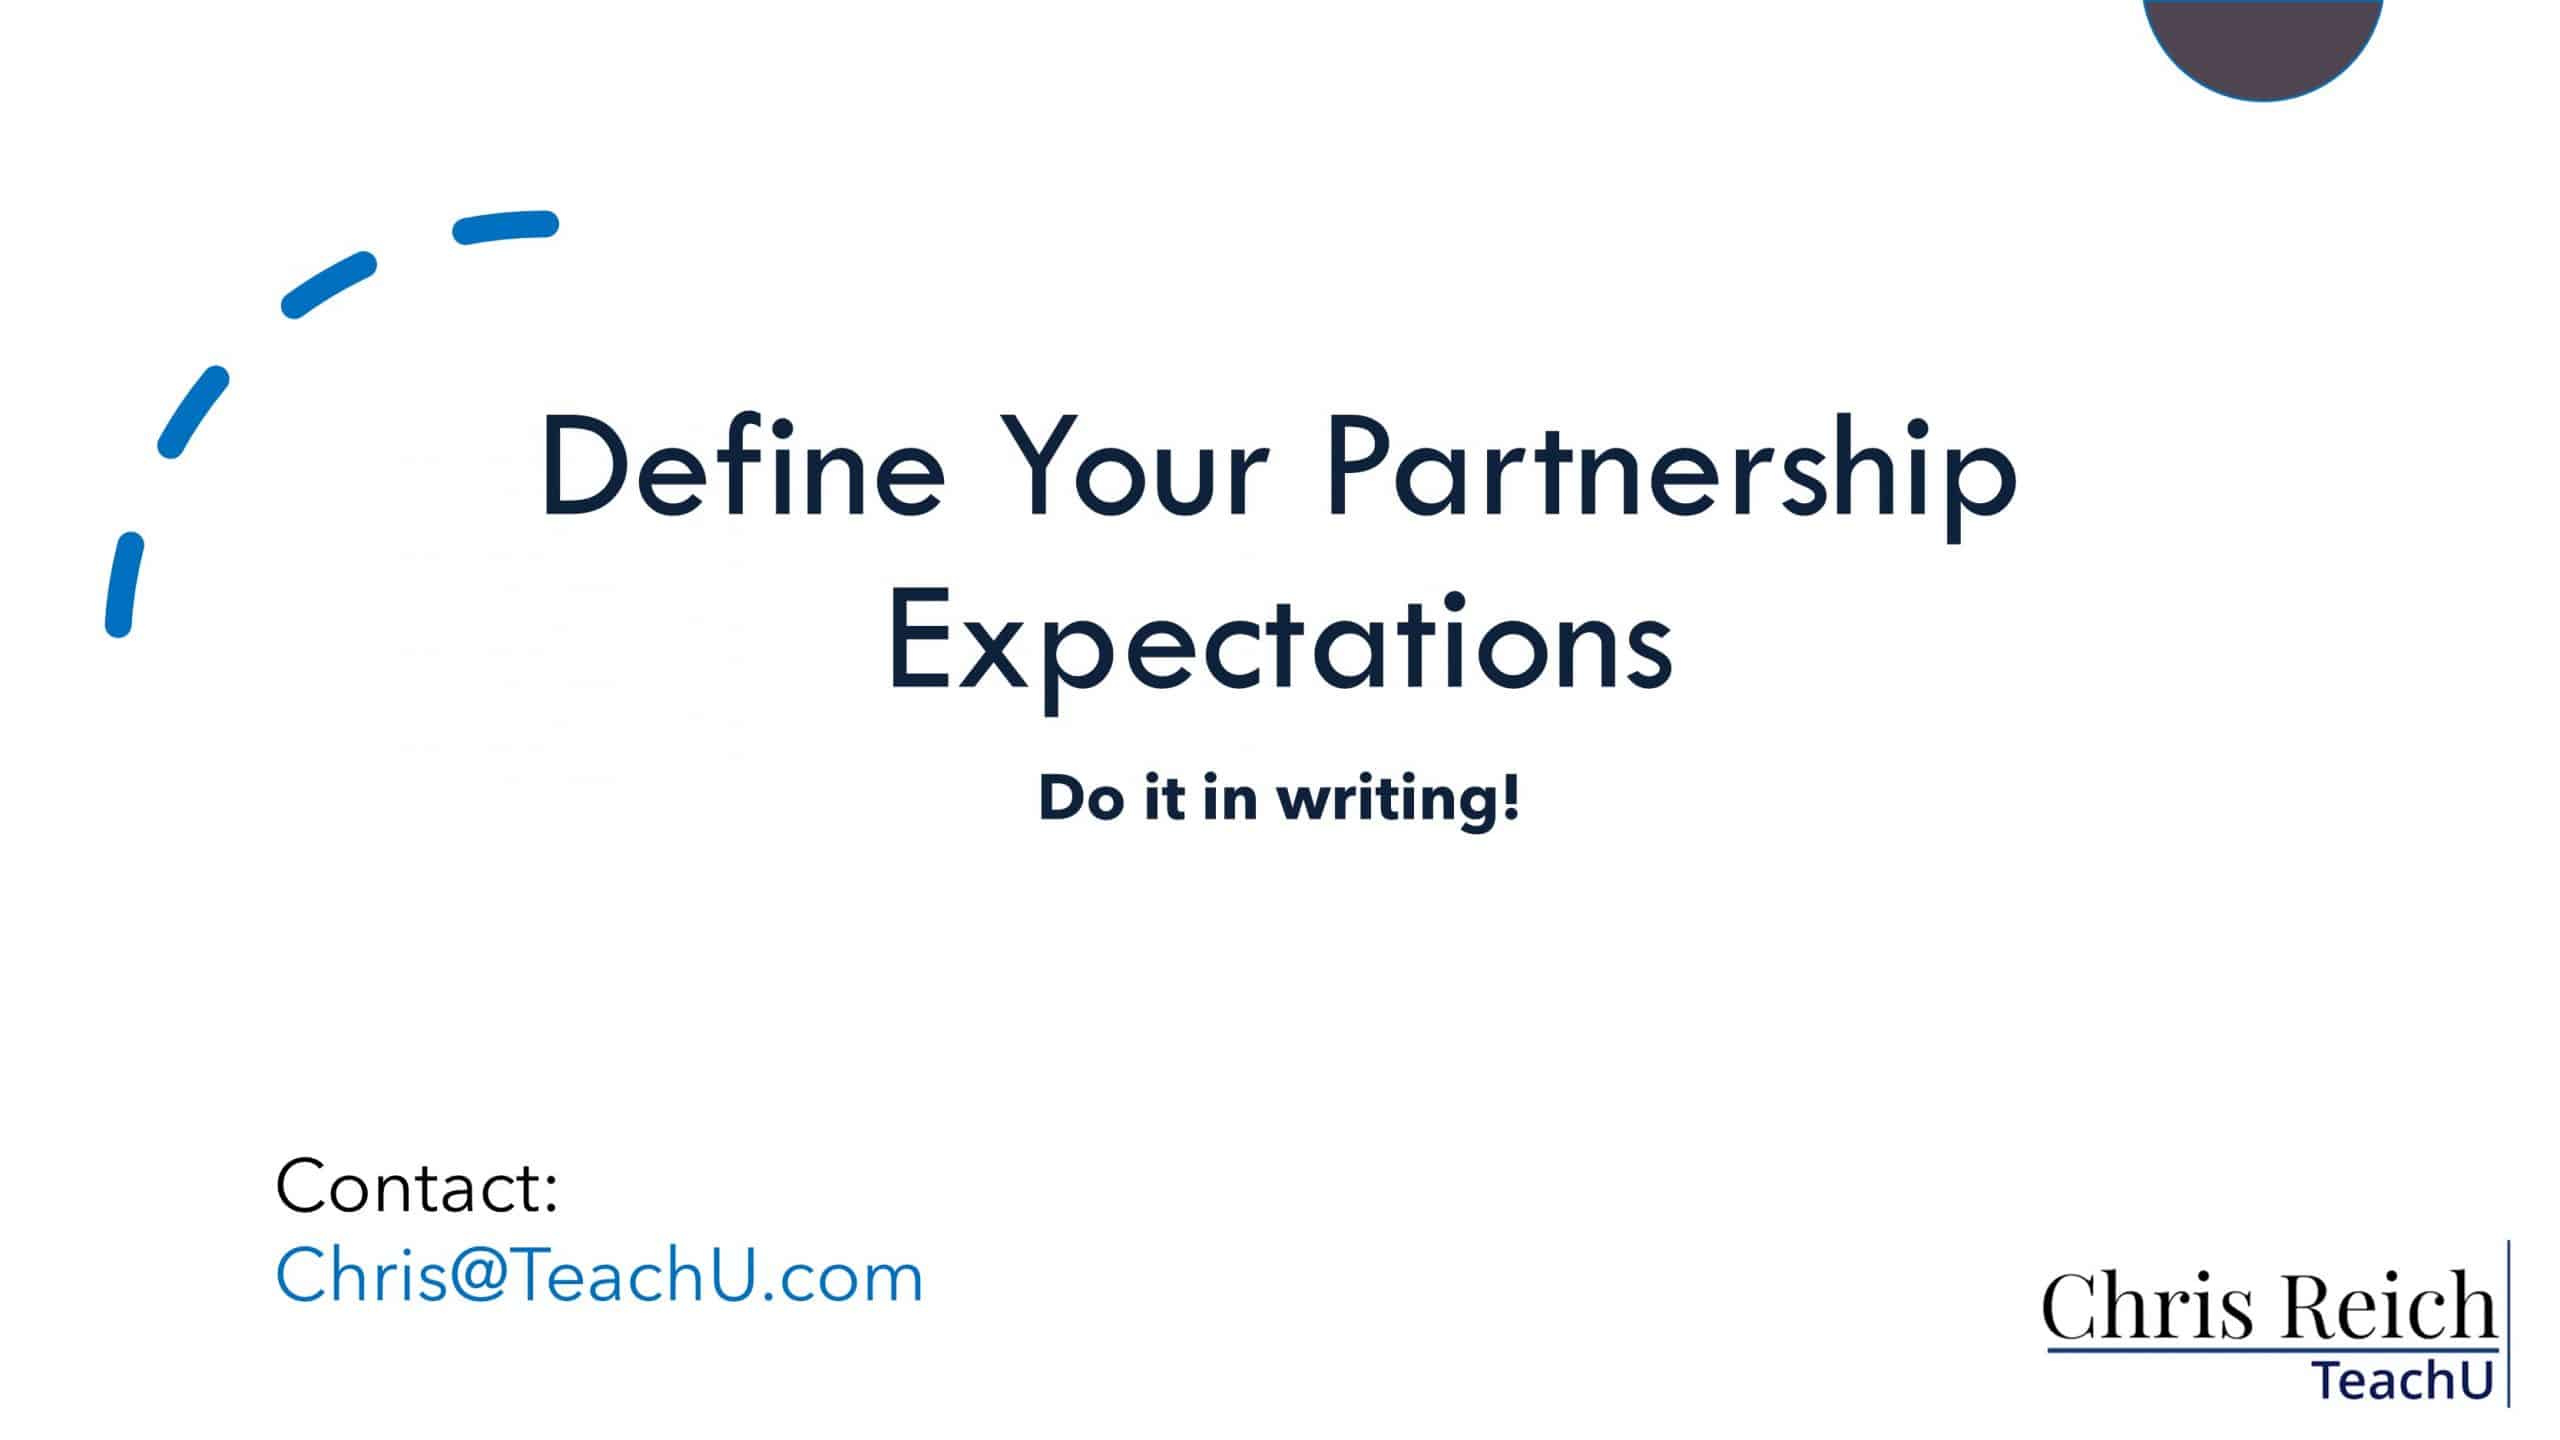 About Documenting Partnership Expectations